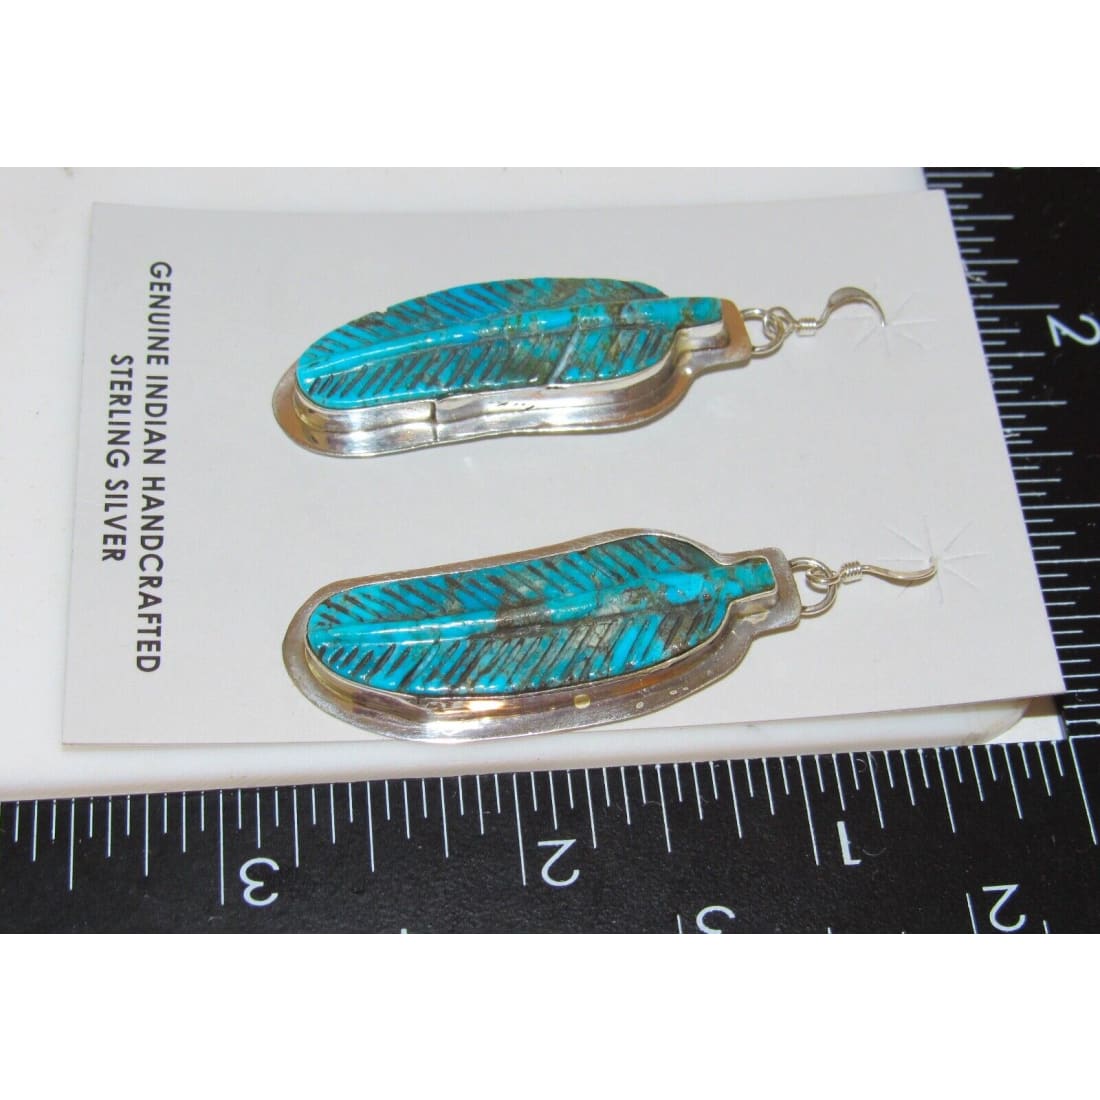 Navajo Sterling Silver Carved Turquoise Feather Dangle